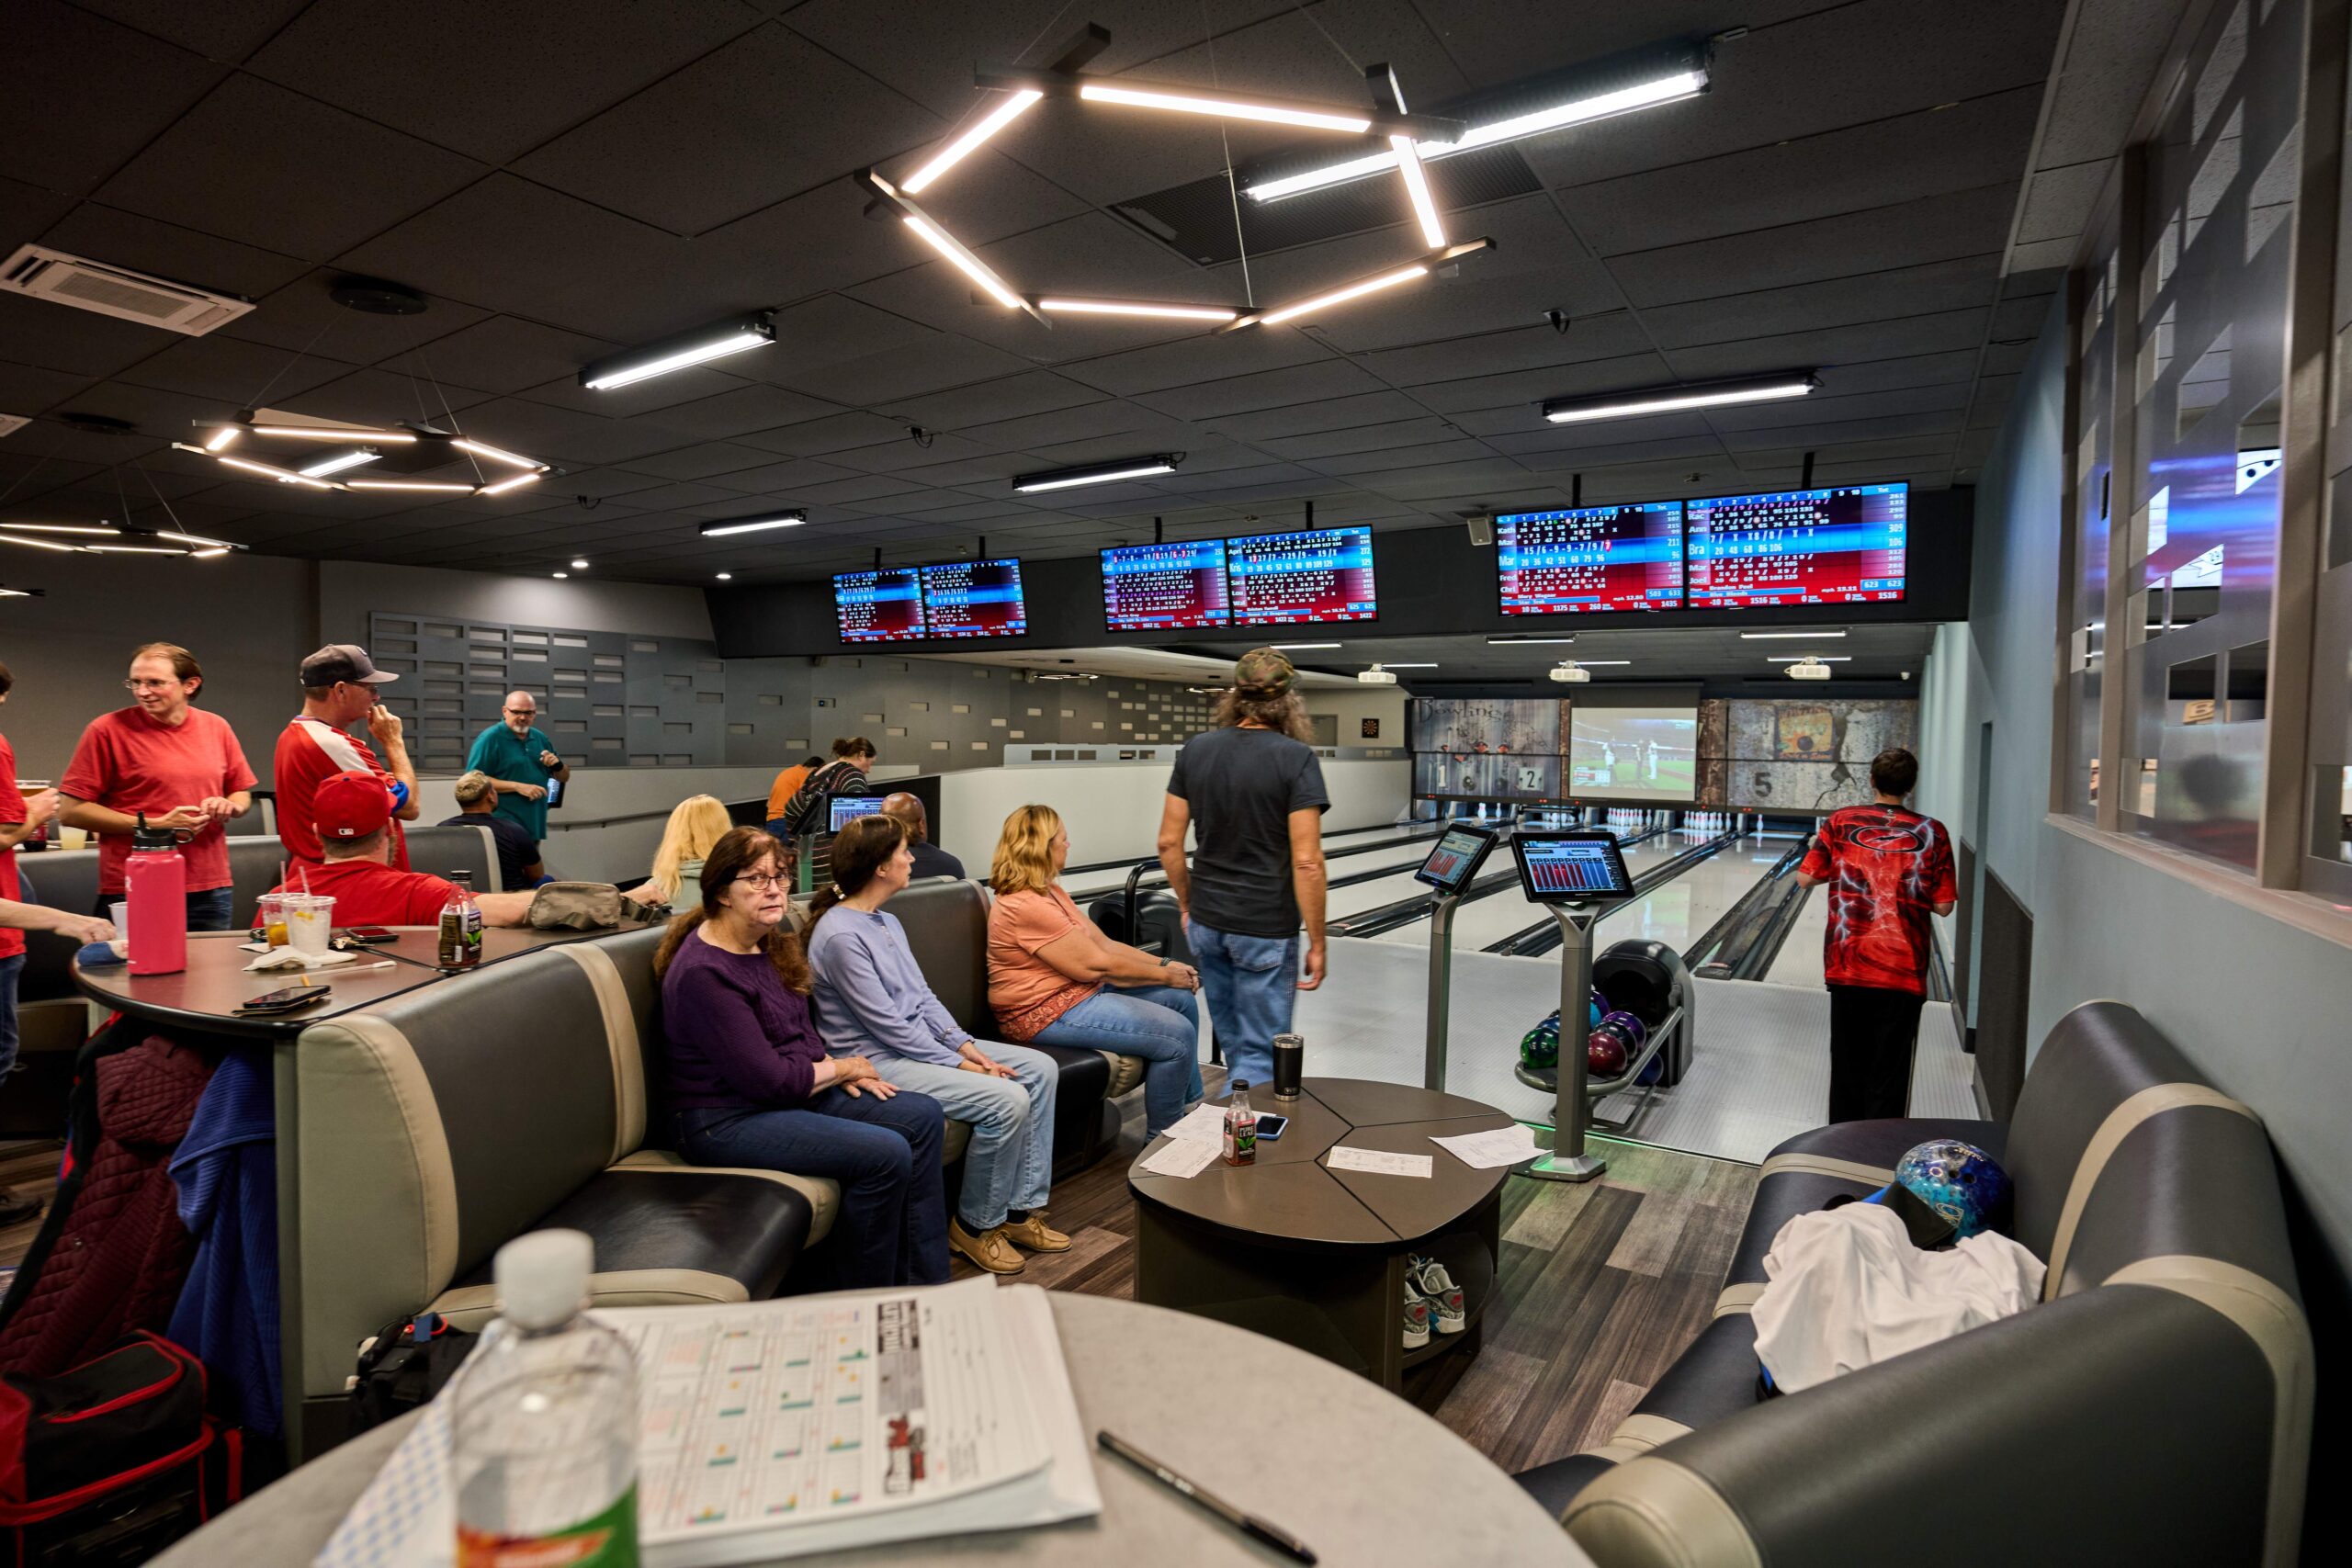 Strike Gold: 8 Compelling Reasons to Plan Your Next Party at a Bowling Center!